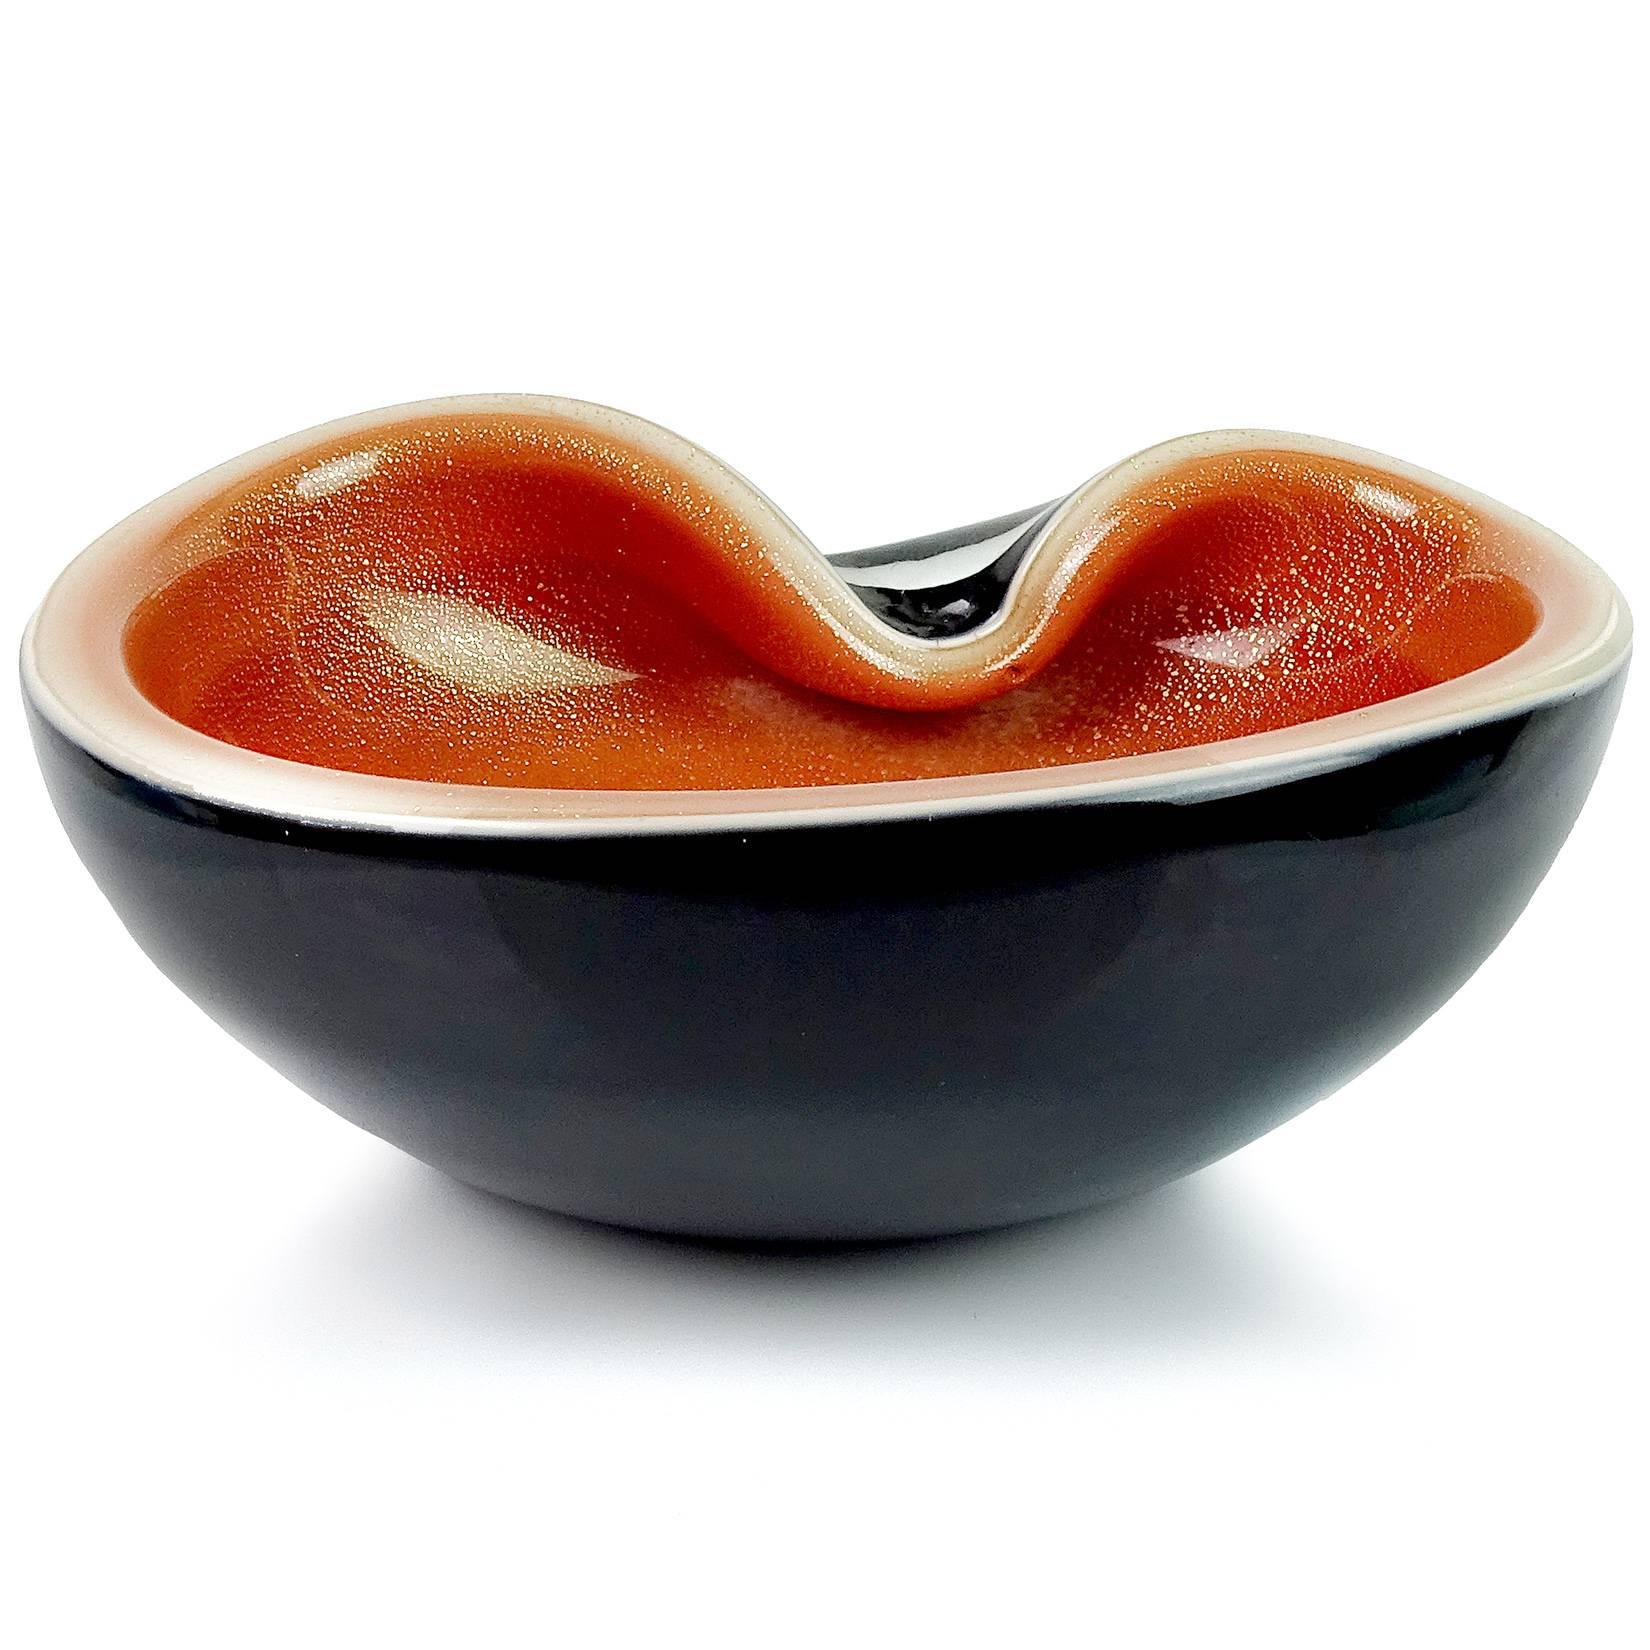 Beautiful Murano hand blown black over persimmon orange and gold flecks Italian art glass decorative bowl. Attributed to designer Alfredo Barbini. The piece has heavy gold leaf on the inside. Can be used as a display piece on any table. Use it as a